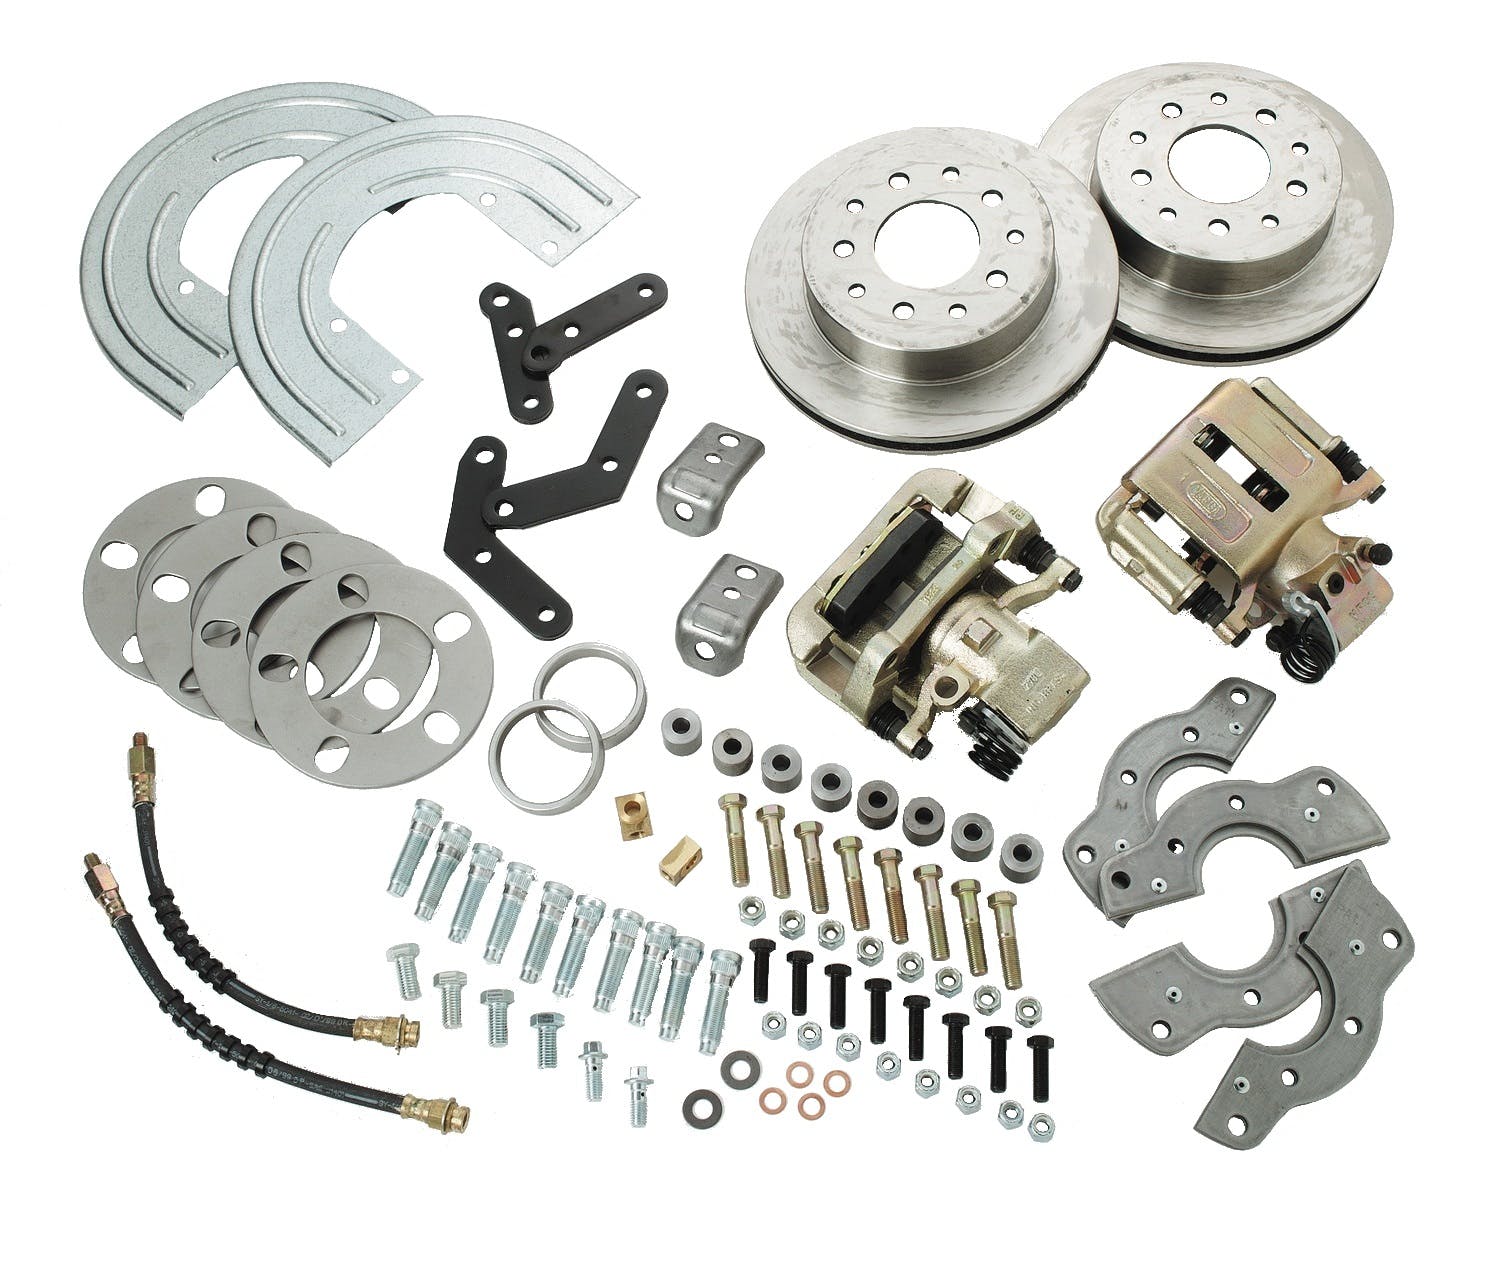 Stainless Steel Brakes A111-2BK Kit A111-2 w/black calipers